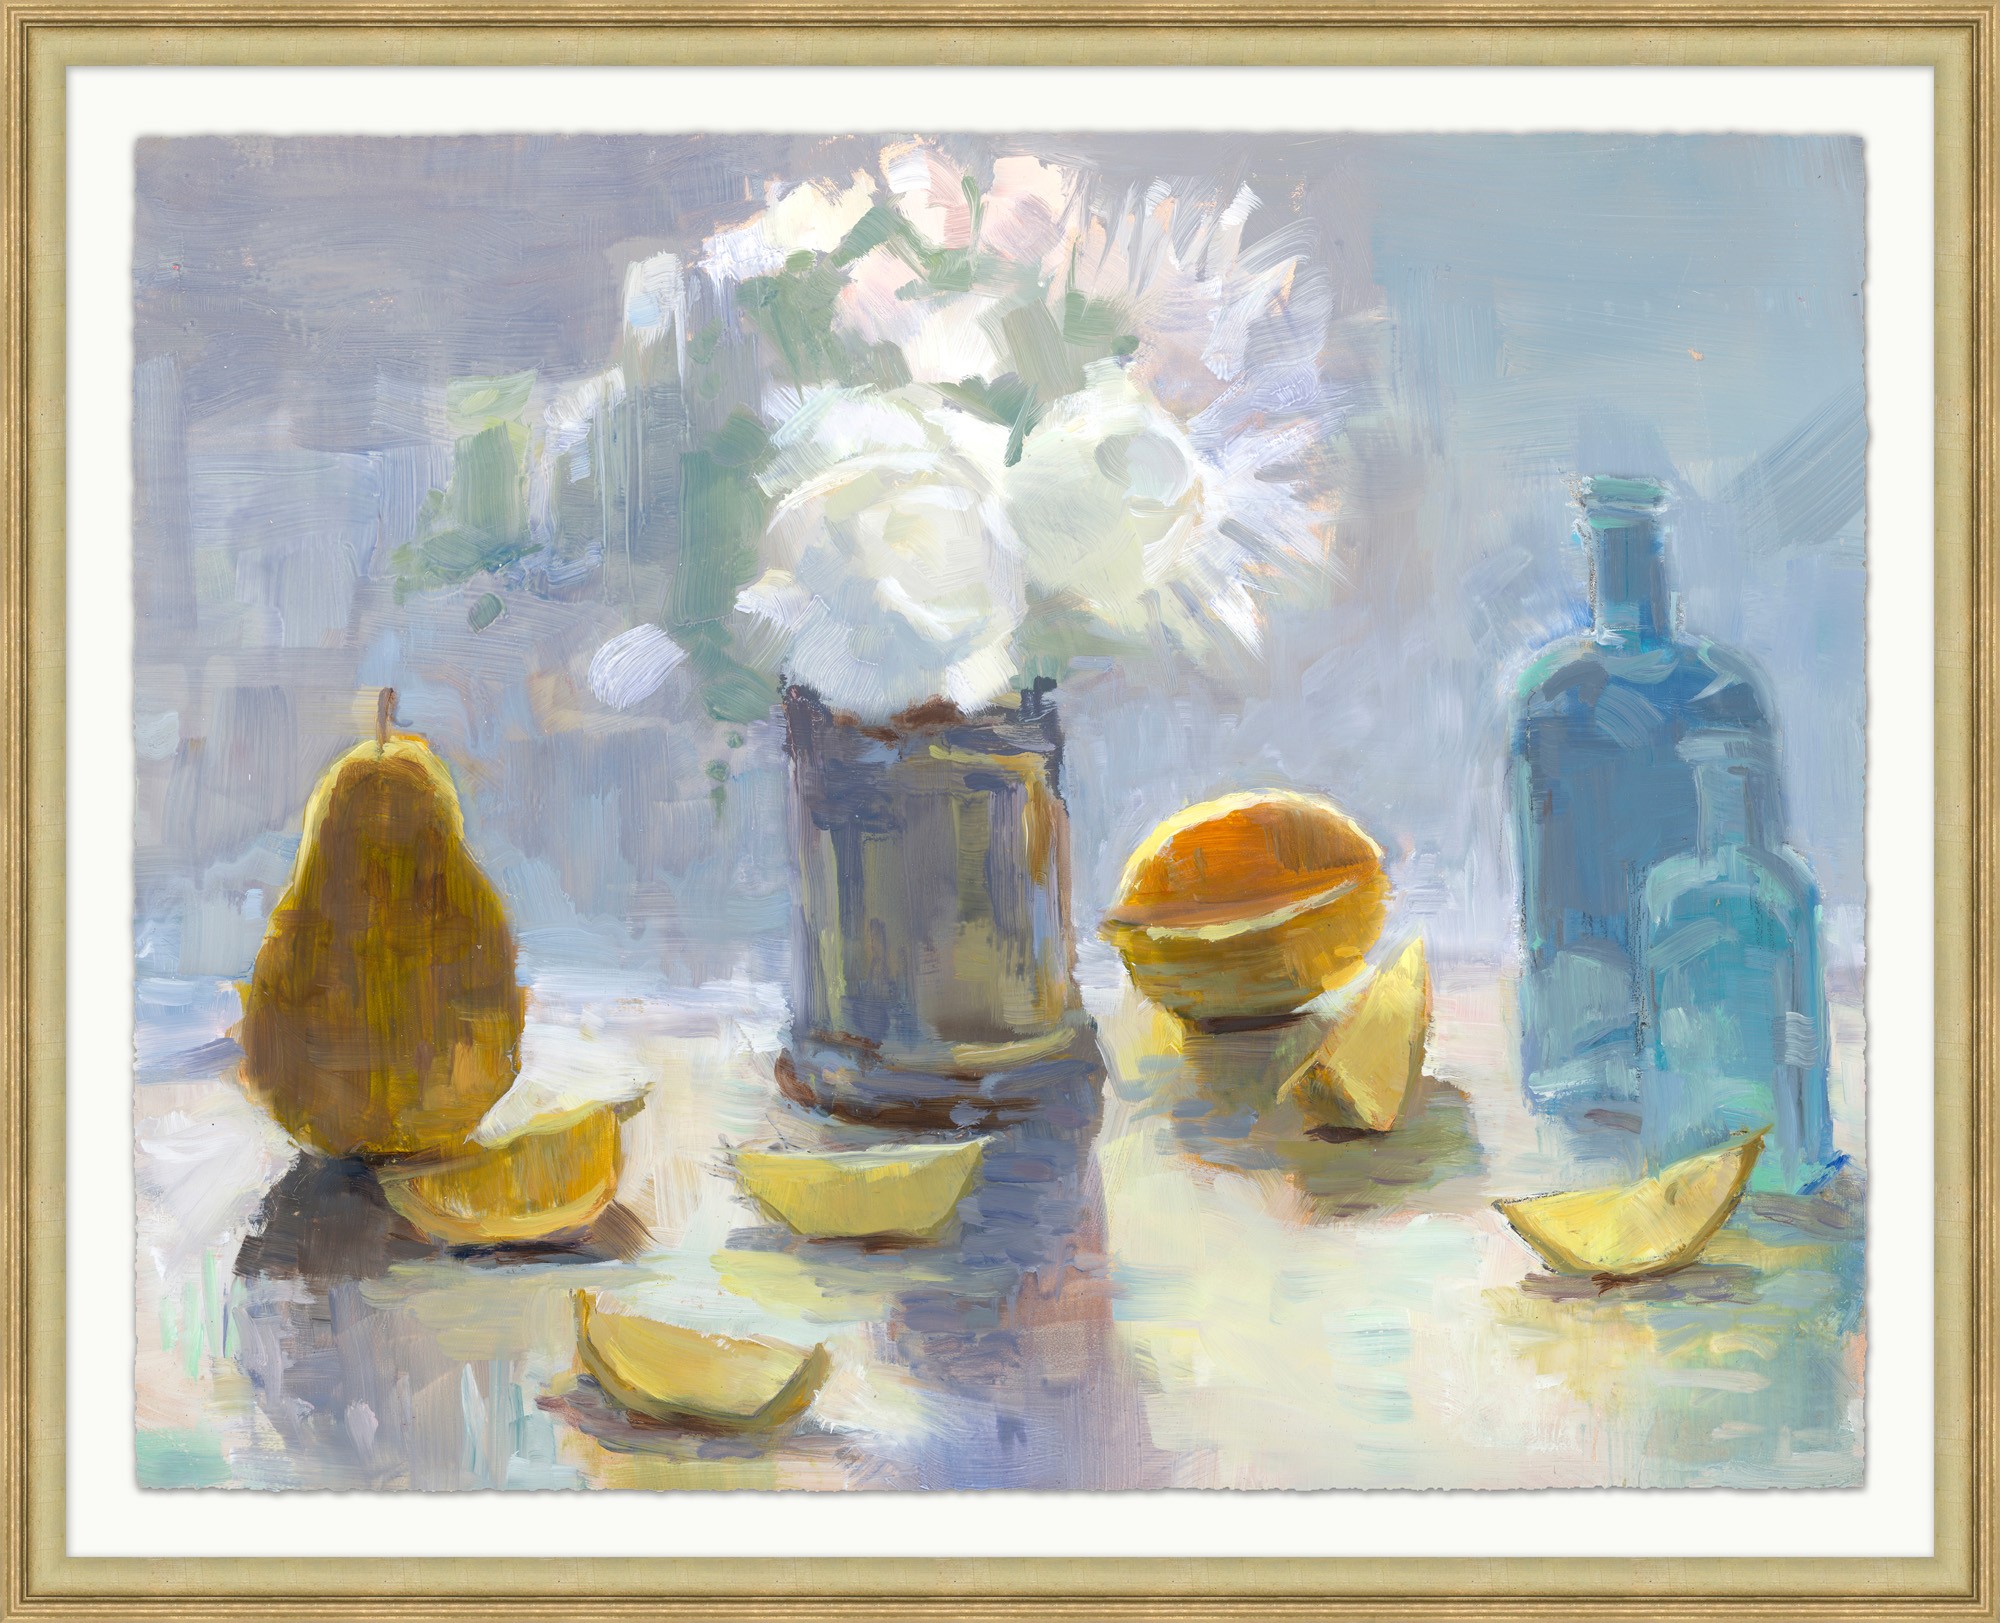 Painting of fruit around a vase with flowers